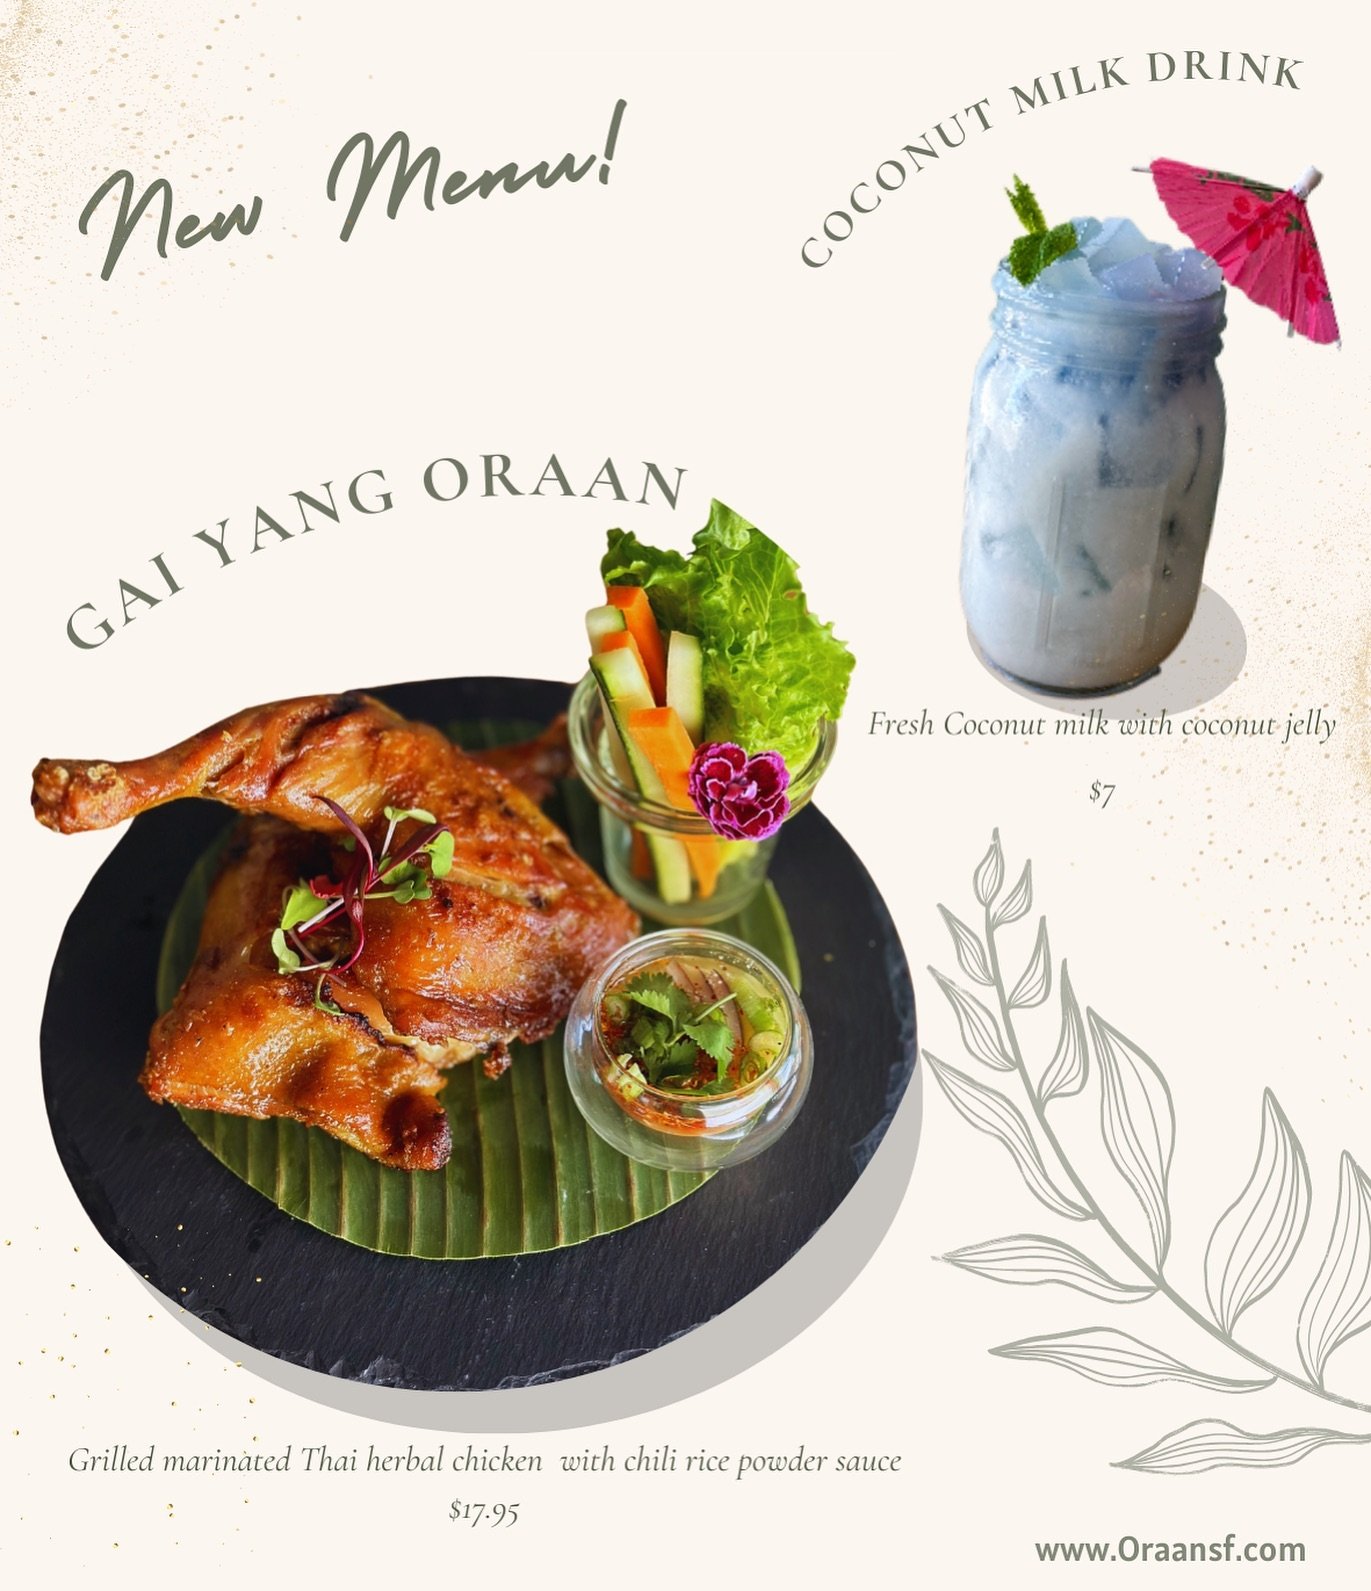 ✨Meet our new menu! 

🌴Oraan Coconut Milk Drink : refreshing house made coconut milk drink with coconut jelly

🍗Gai Yang Oraan : Grilled marinated Thai herbal chicken served with chili rice powder sauce

Available from now on!

💚 We are open!
⚡️Su